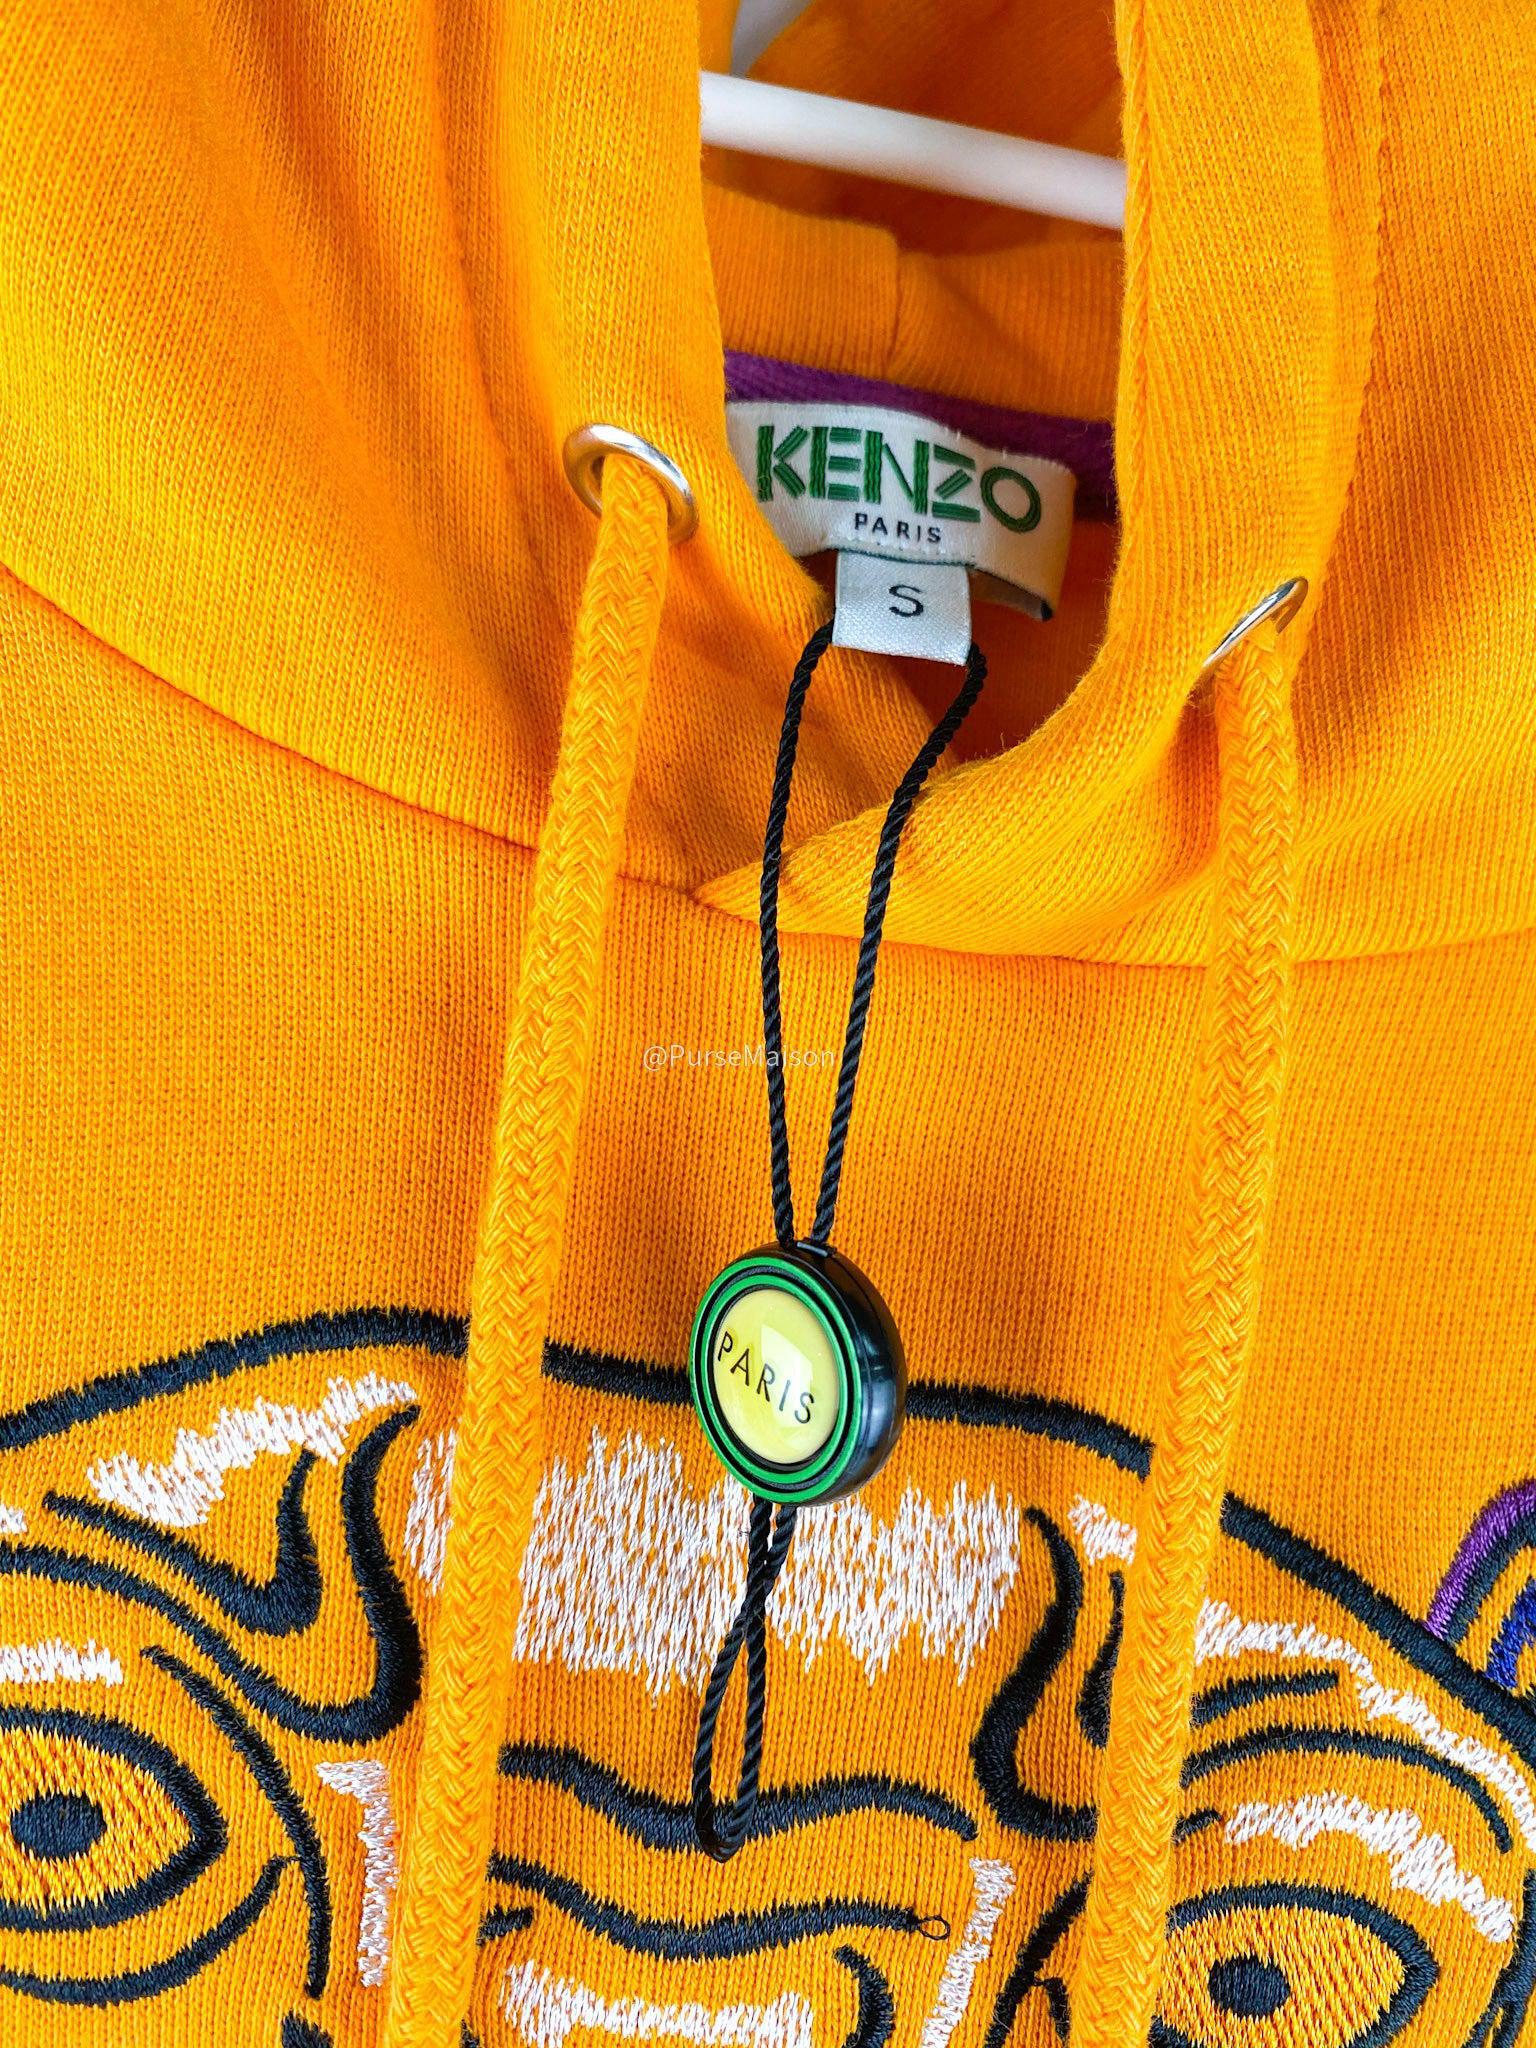 Kenzo Embroidered Tiger Crew Hoody Jacket (Small)